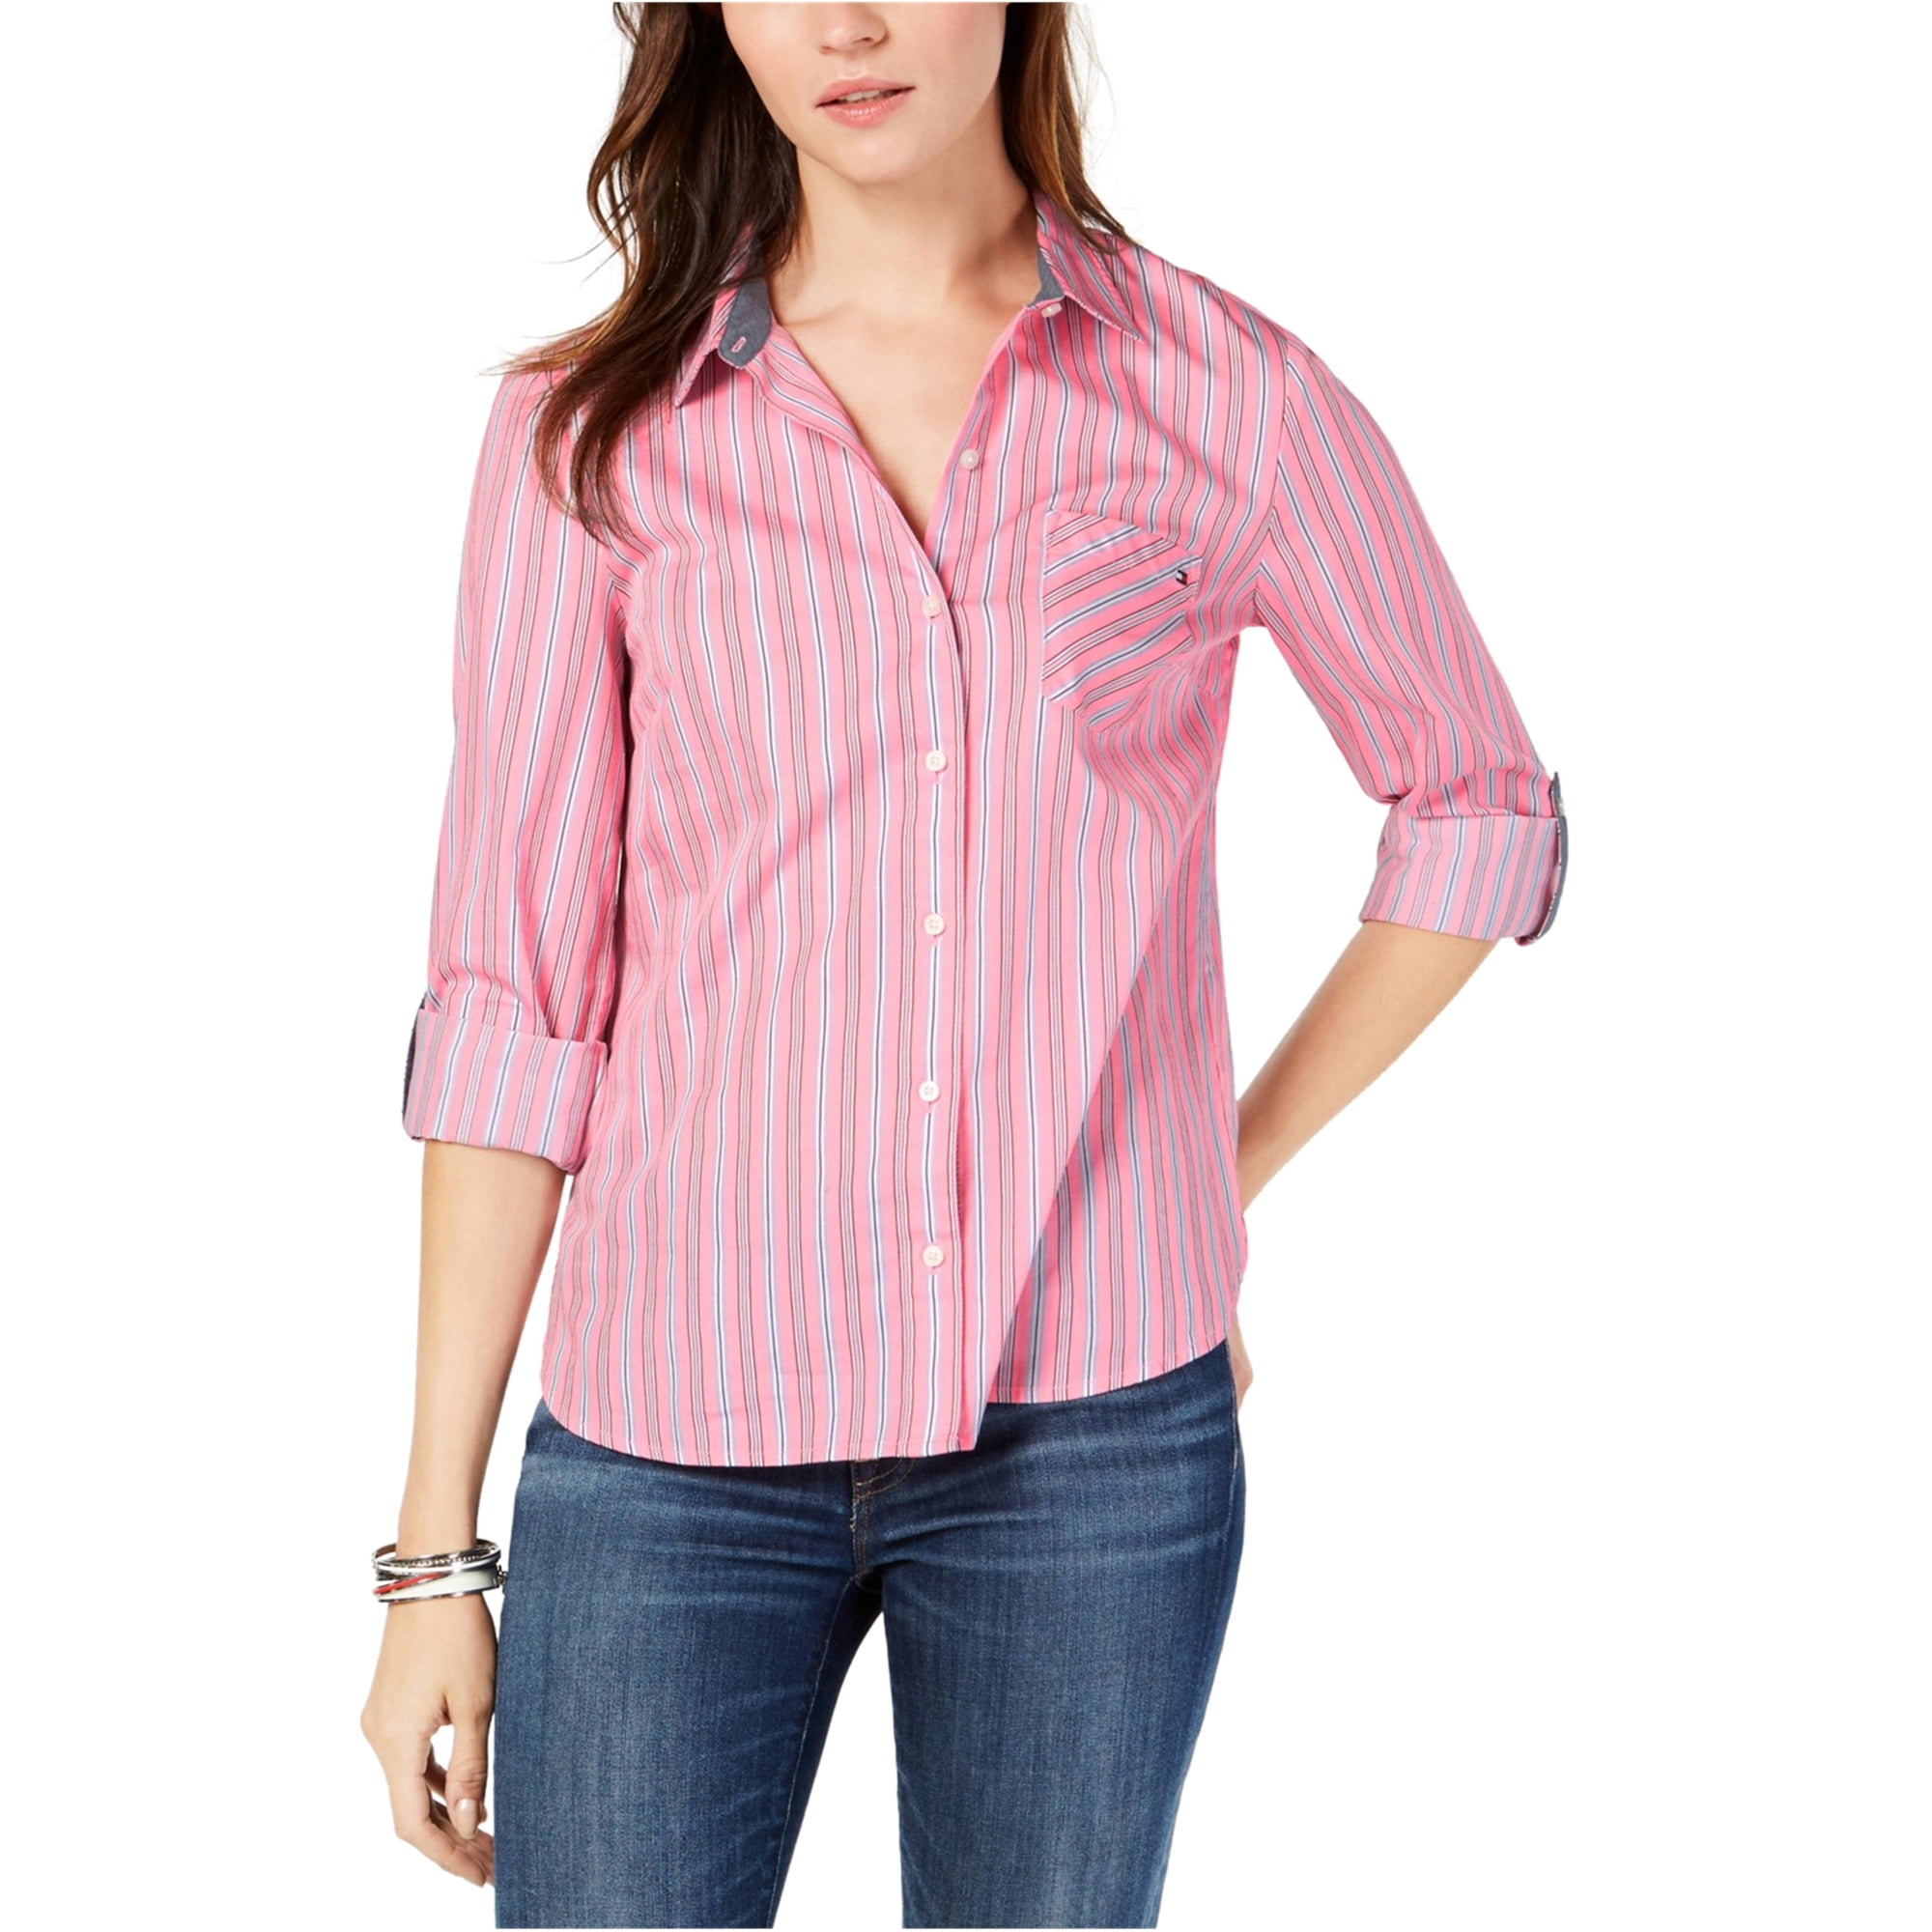 Tommy Hilfiger - Tommy Hilfiger Womens Striped Button Down Blouse, Pink